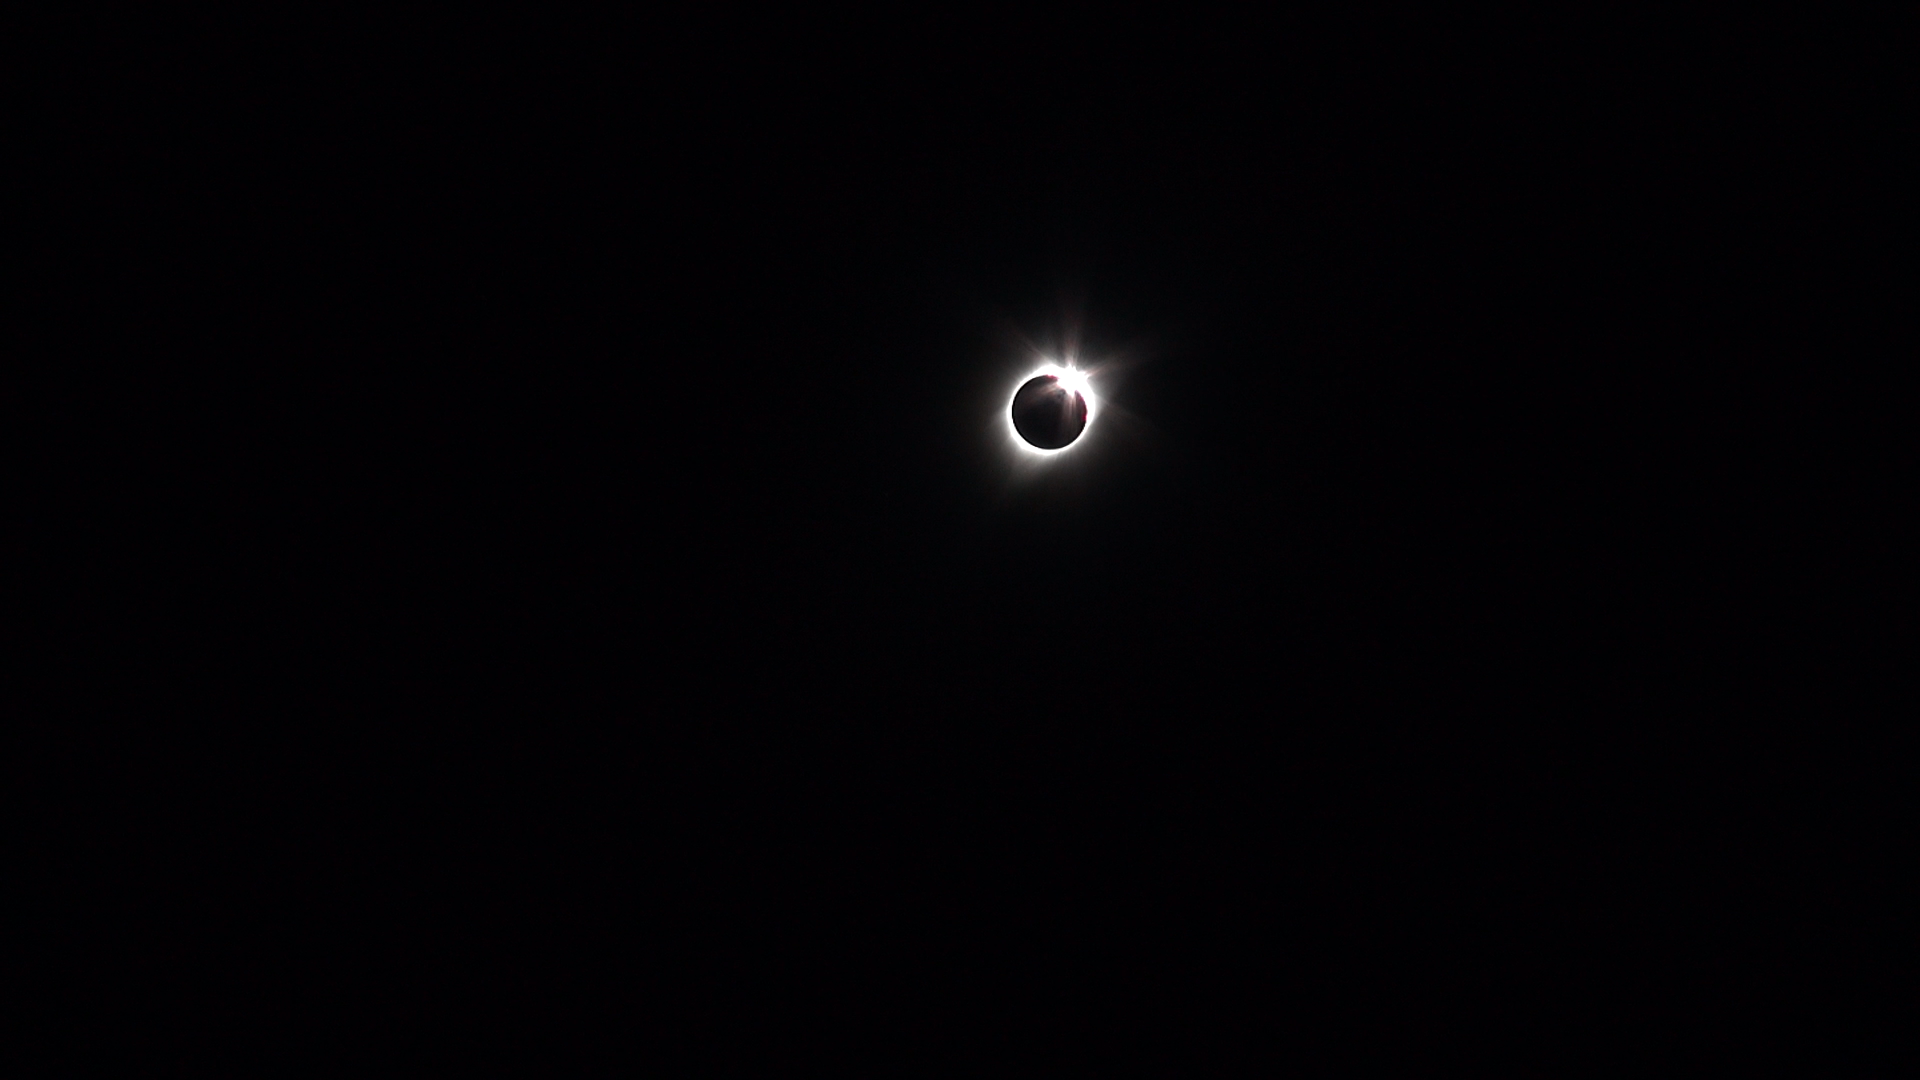 The 'Diamond Ring' marks the end of totality